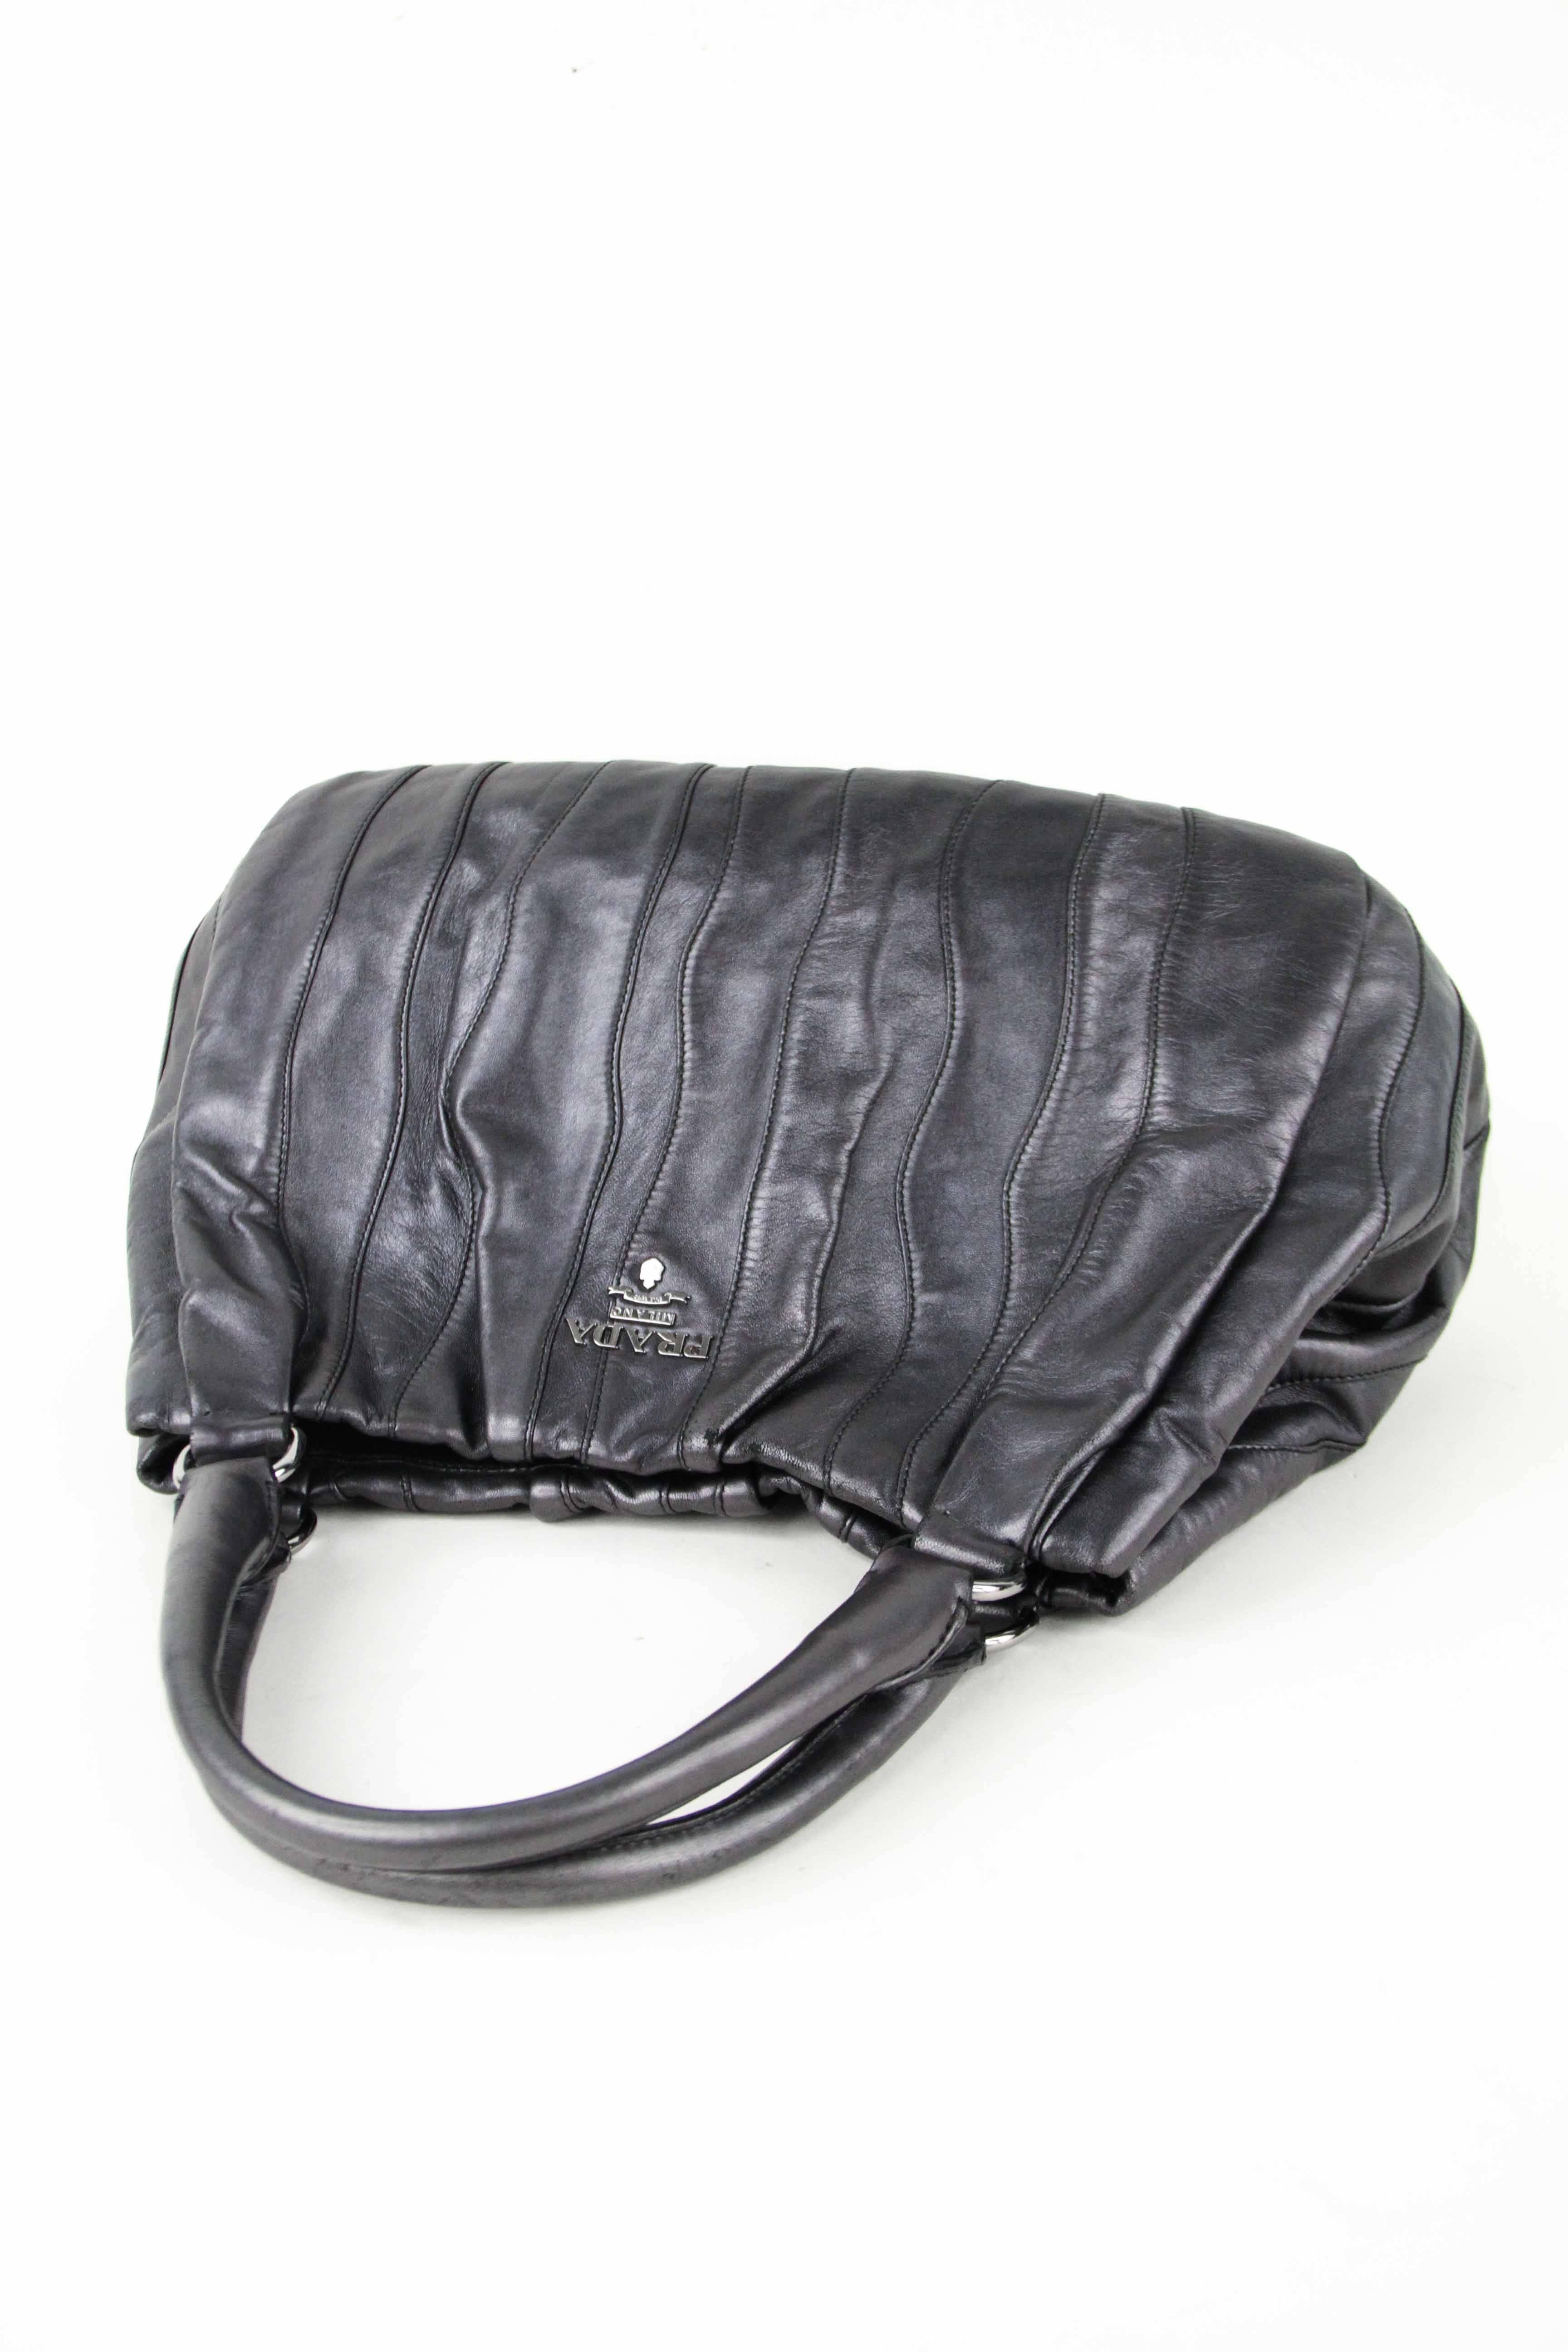 Offered is a beautiful pewter metallic hobo bag with striped stitching details throughout.  Amazing craftsmanship and design on a supple Napa calfskin.  Two rolled leather handles with a large strap drop for easy wearing on shoulder. 
Grey gunmetal